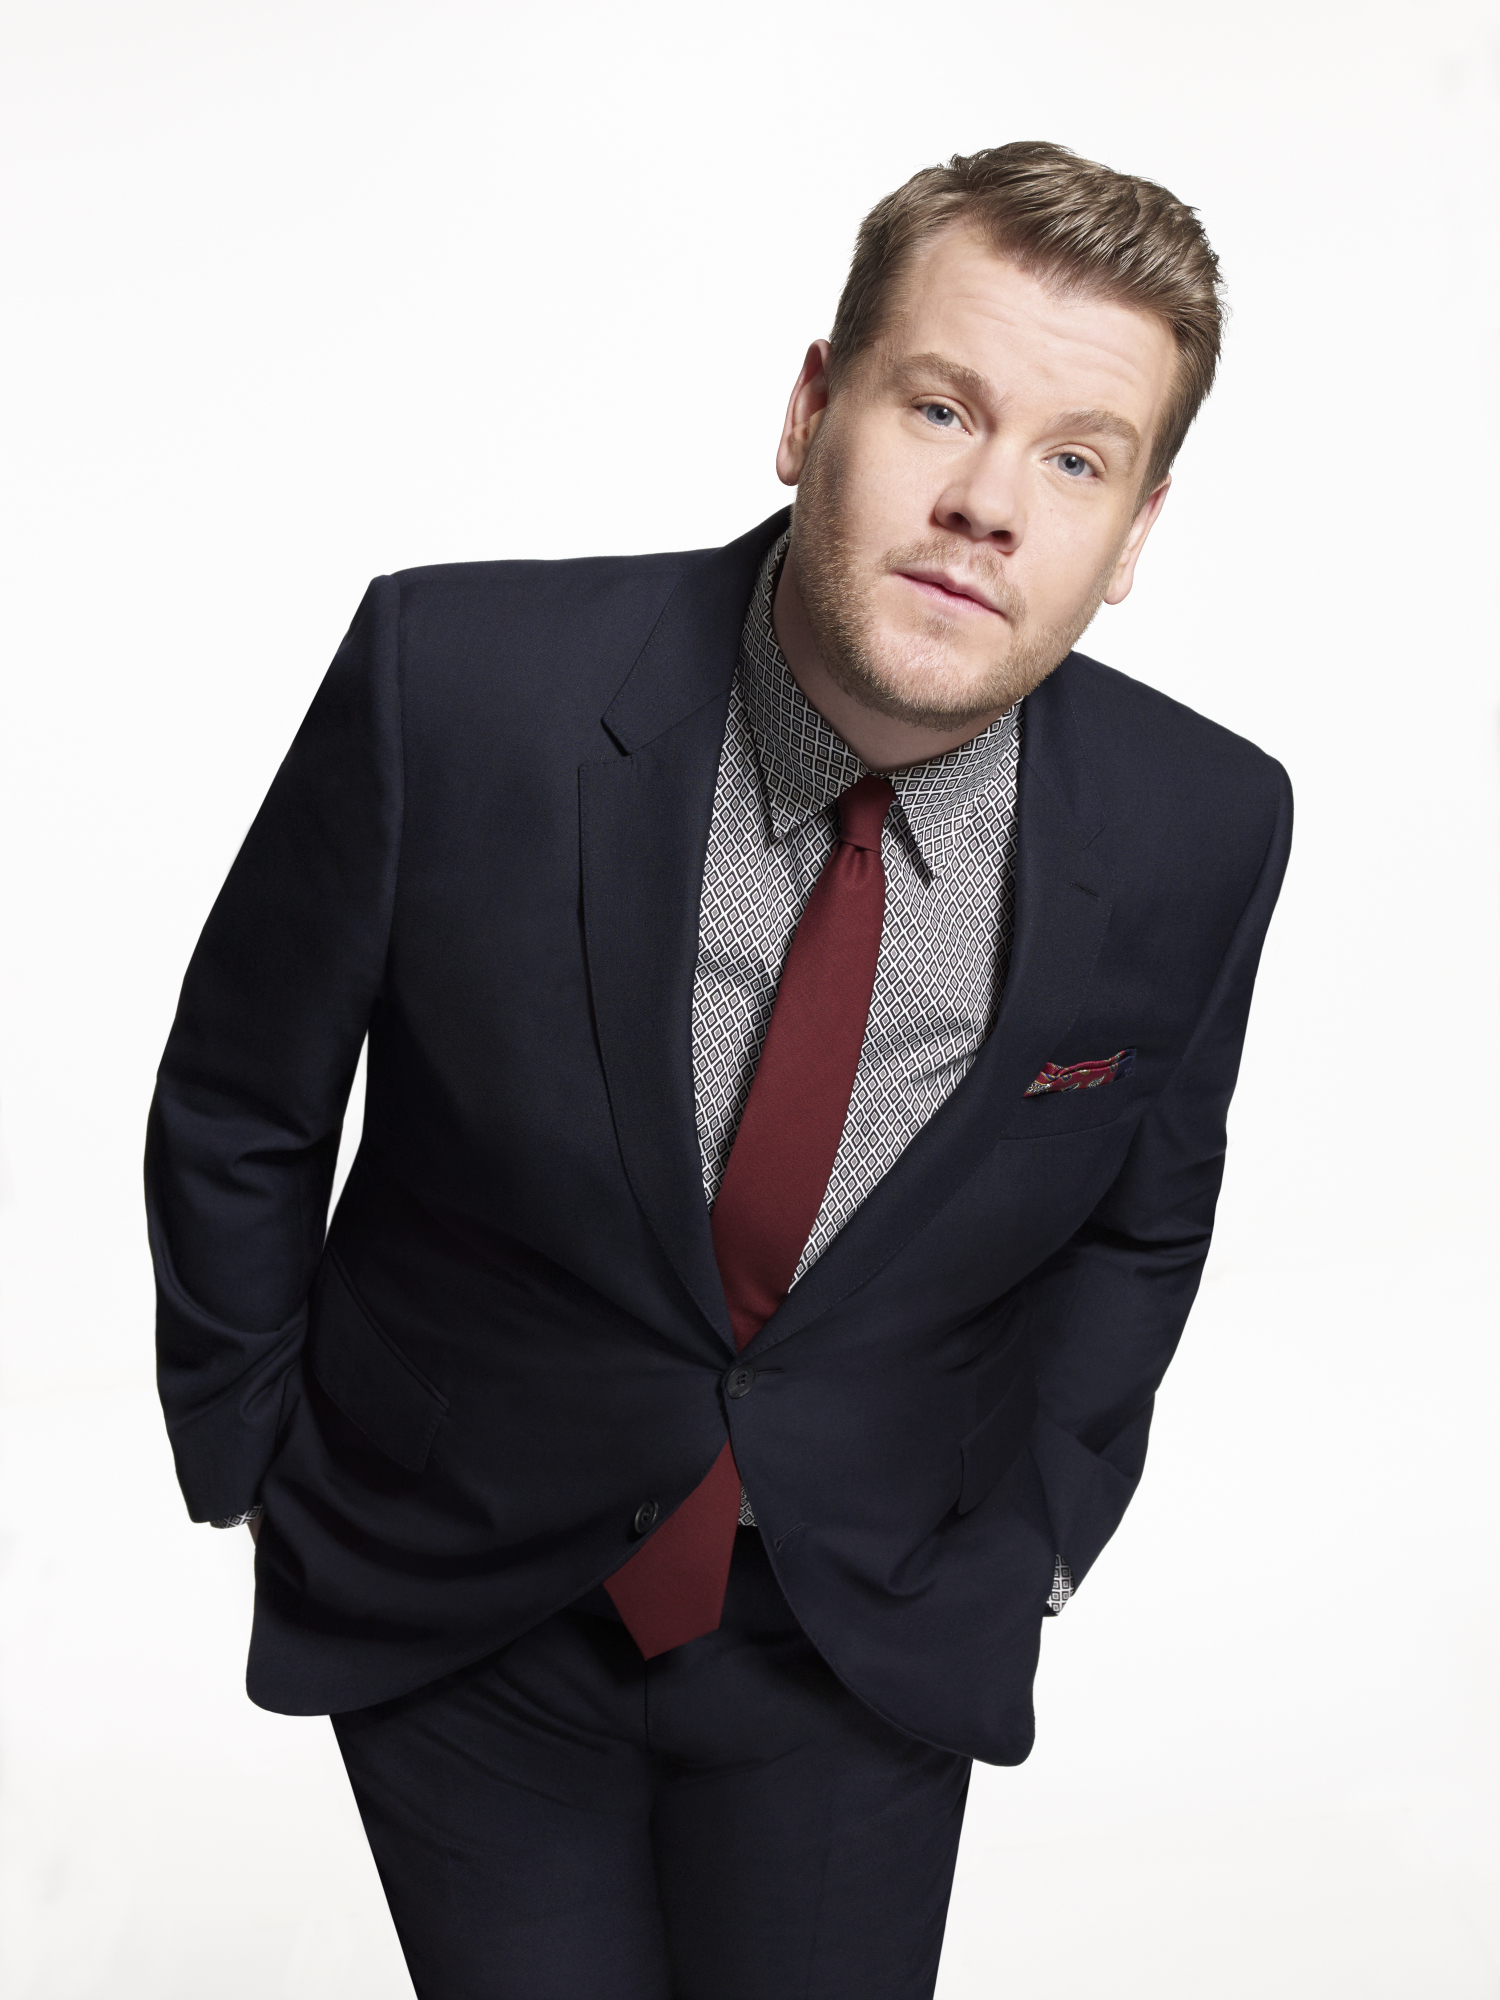 james-corden-late-late-show